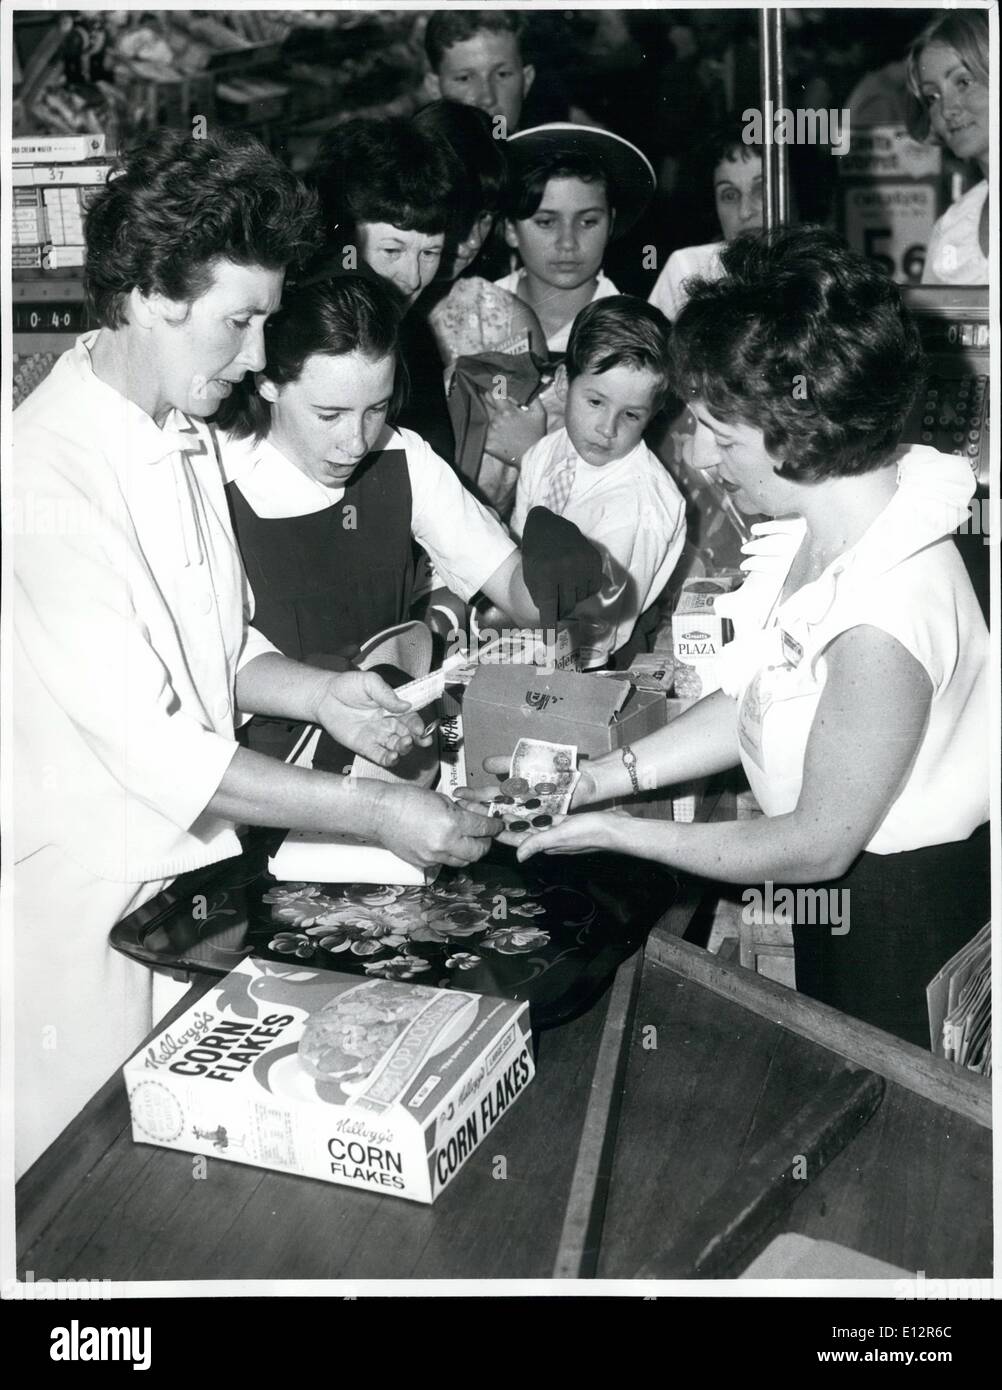 Feb. 25, 2012 - Decimal currency in Australia ; A major event in Australia in February, 1966, was the change-over to decimal currency. picture above shows Shoppers in a Sydney store making purchases in mixed pounds, shillings and pence and decimal currency. Stock Photo